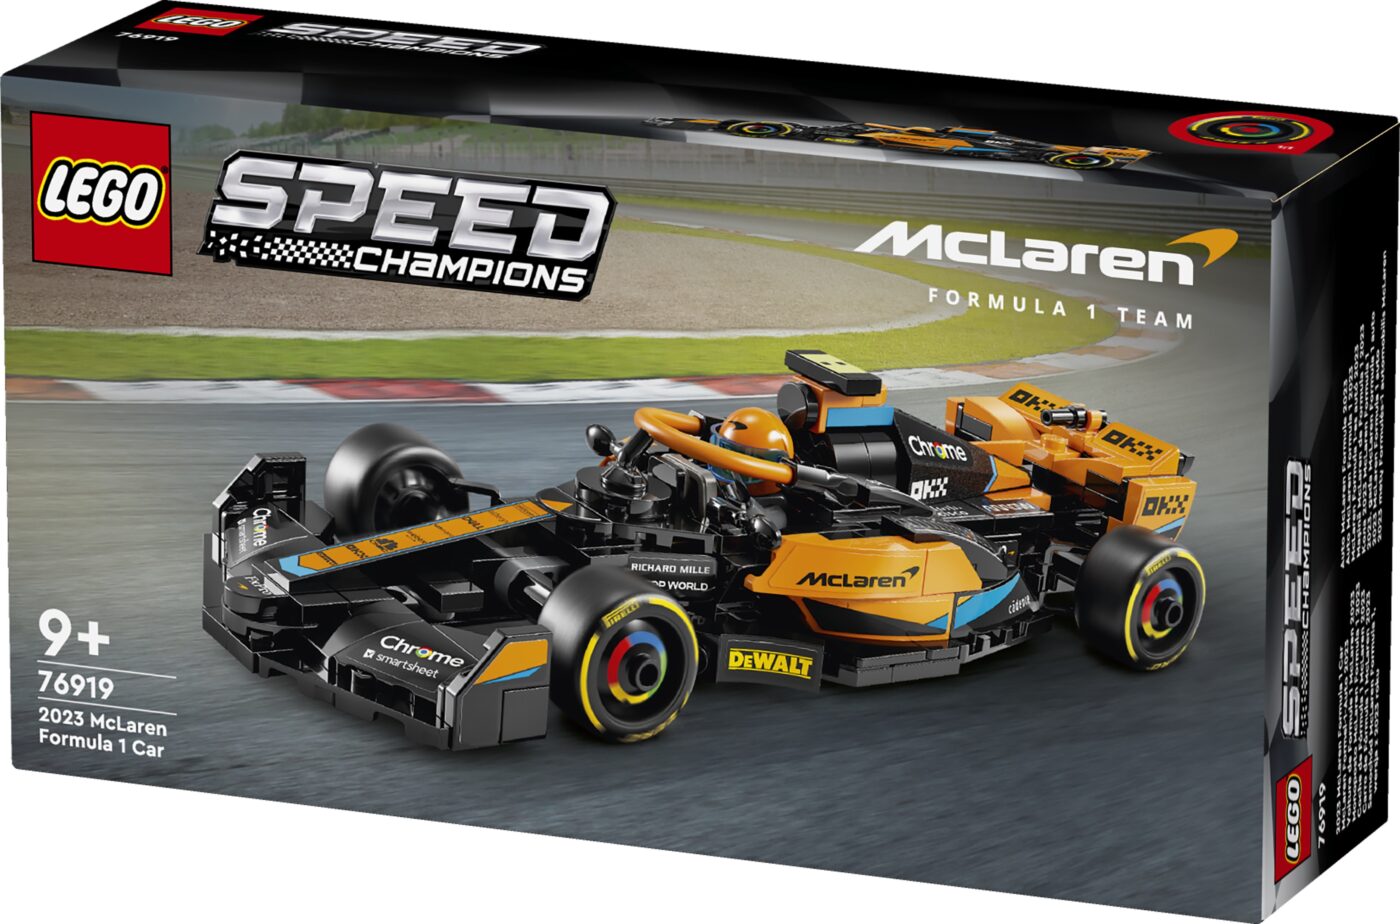 New March 2024 LEGO and Technic Formula One-themed sets arrive just in time for the F1 race season22